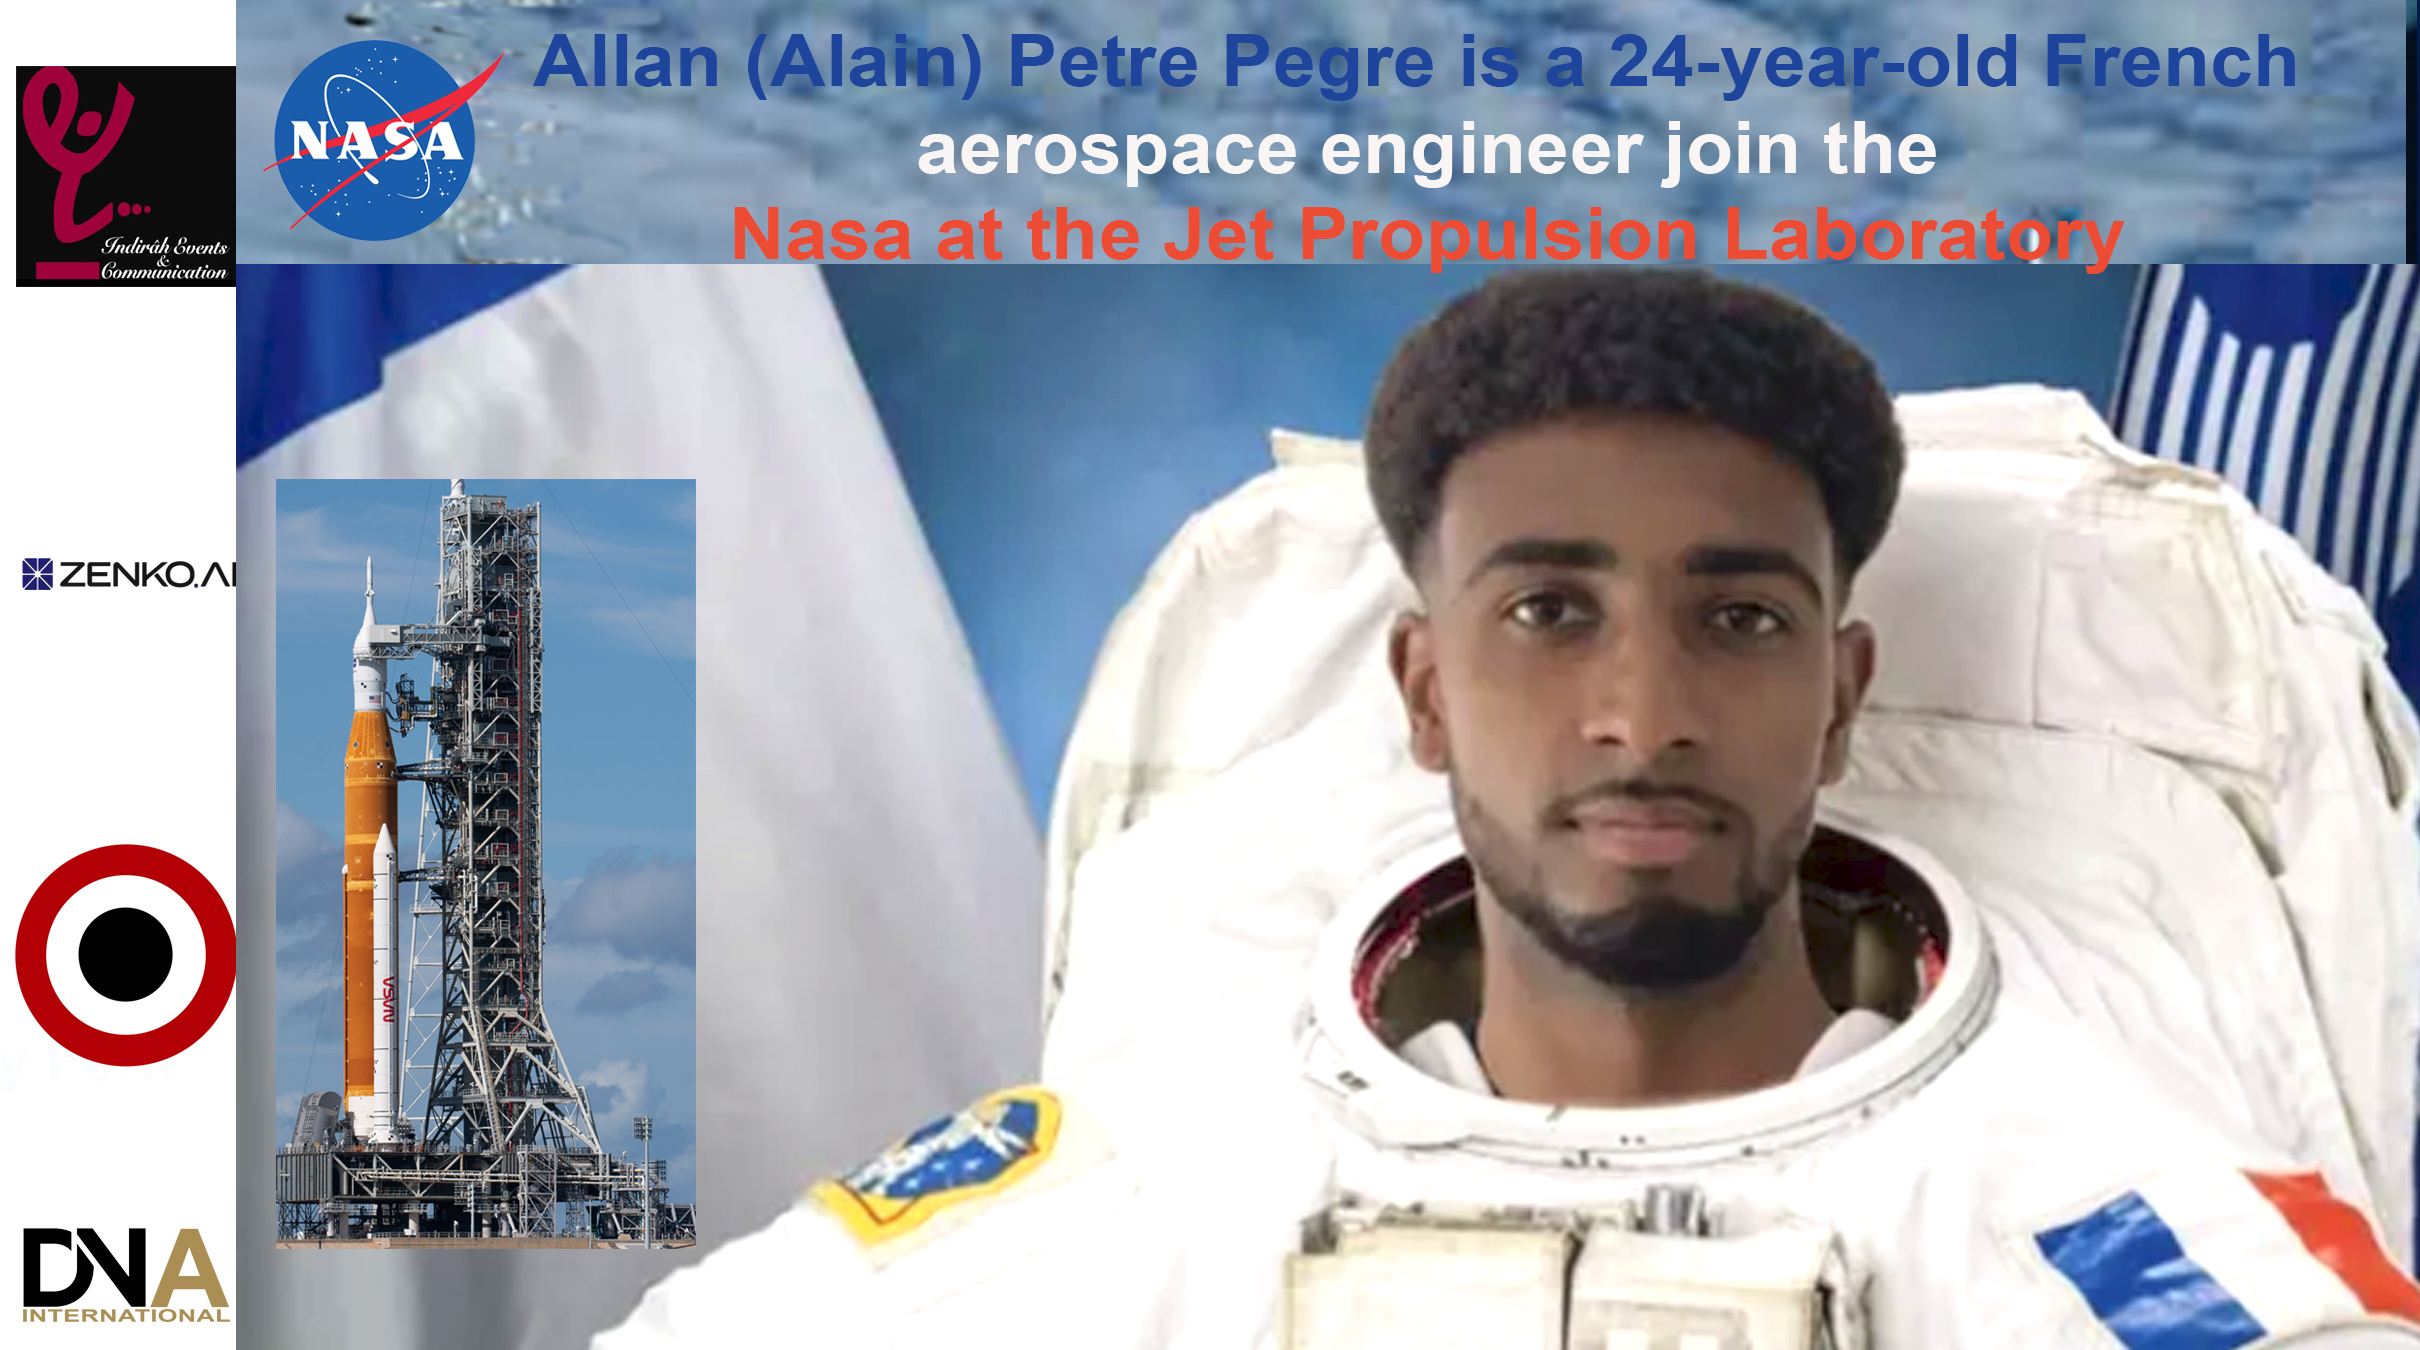 AFRICA-VOGUE-COVER-Allan-(Alain)-Petre-Pegre-is-a-24-year-old-French--aerospace-engineer-join-the-Nasa-at-the-Jet-Propulsion-Laboratory-DN-A-INTERNATIONAL-Media-Partenaire